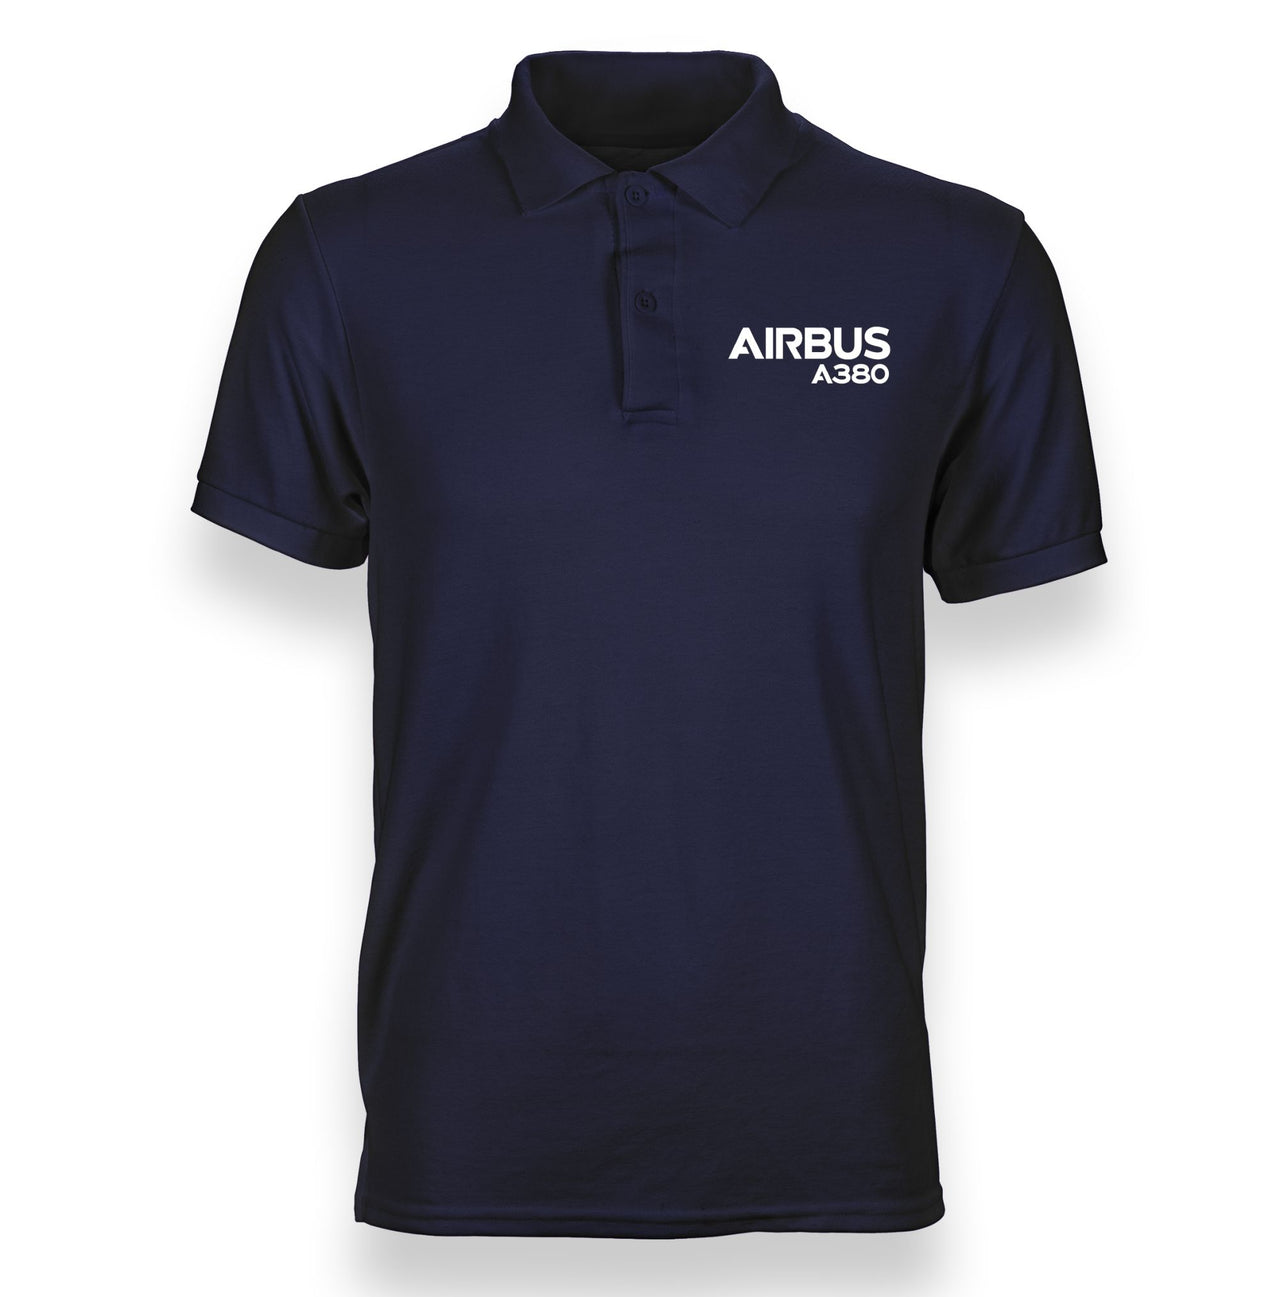 Airbus A380 & Text Designed "WOMEN" Polo T-Shirts